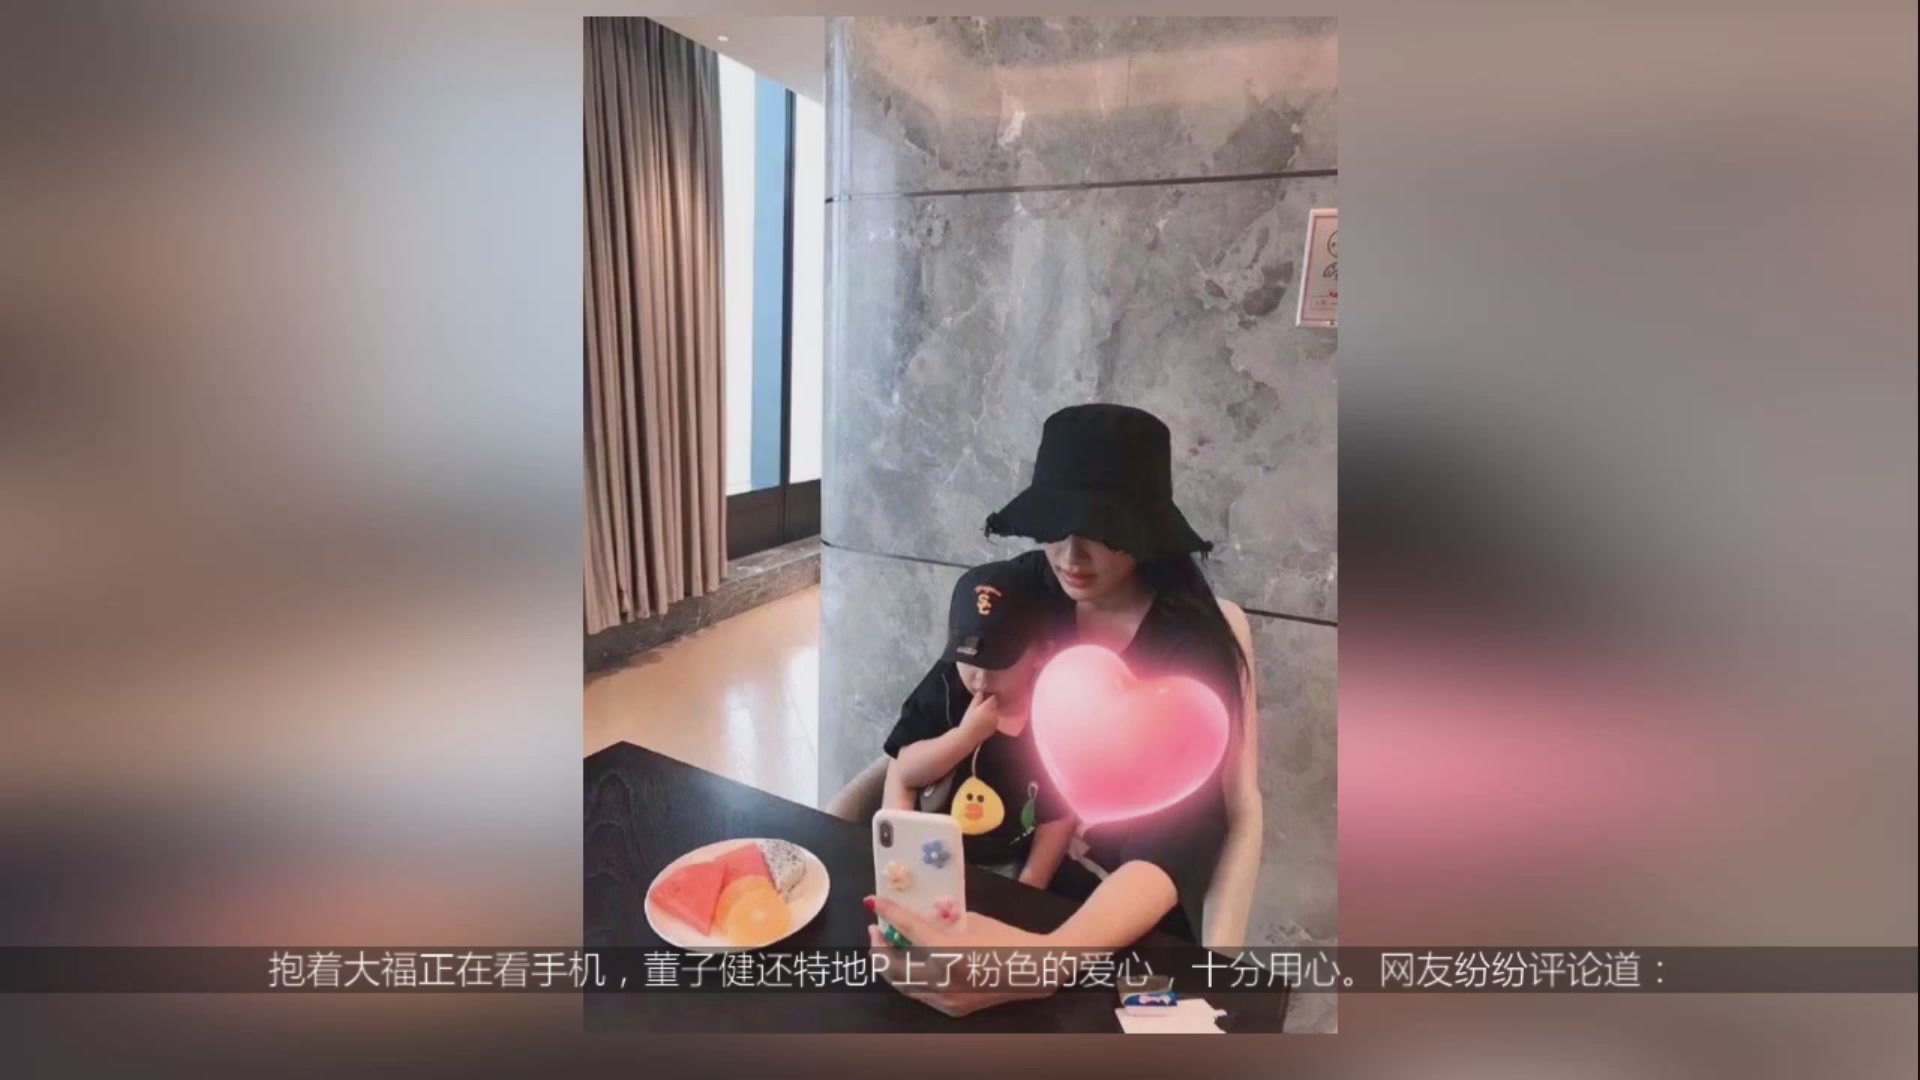 Dong Zijian celebrated Sun Yiqing's birthday by bringing all his praises to his wife.